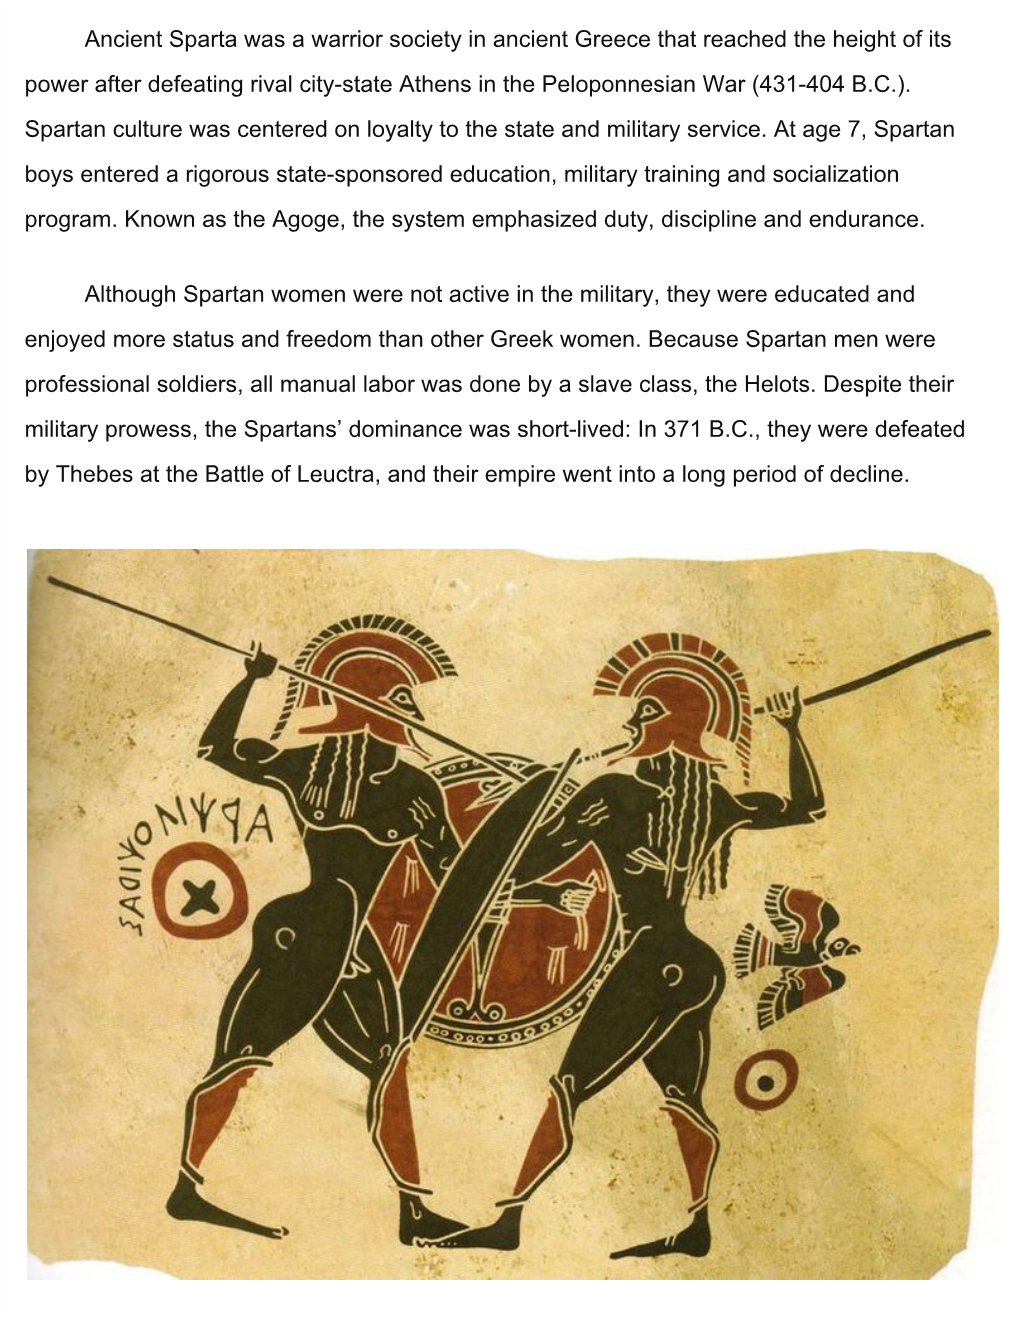 Ancient Sparta Was a Warrior Society in Ancient Greece That Reached